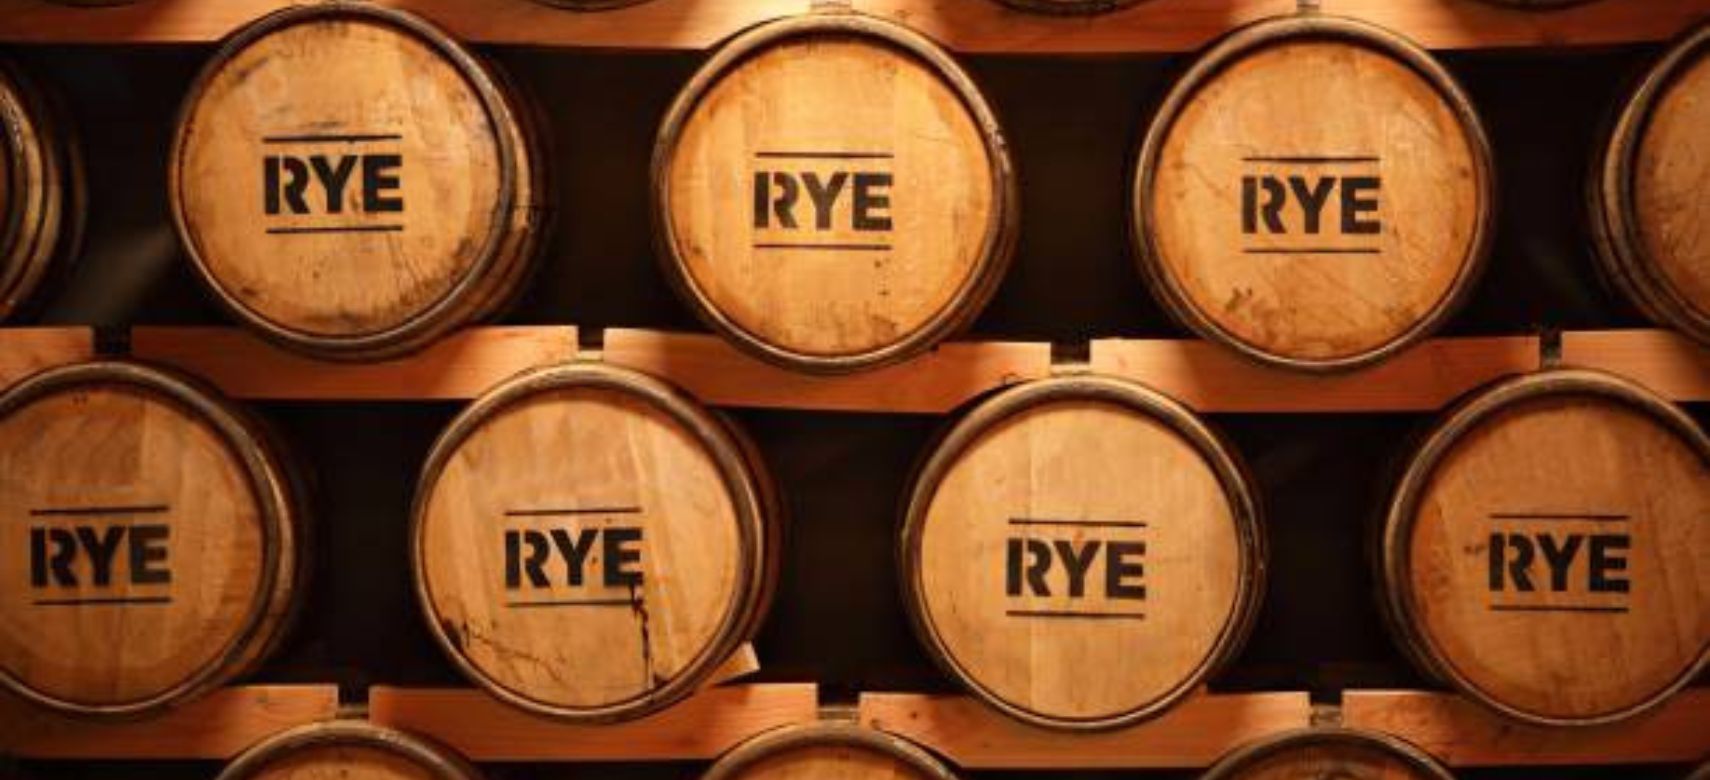 Photo for: Its time we give Pennsylvania its due credit for Rye Whiskey